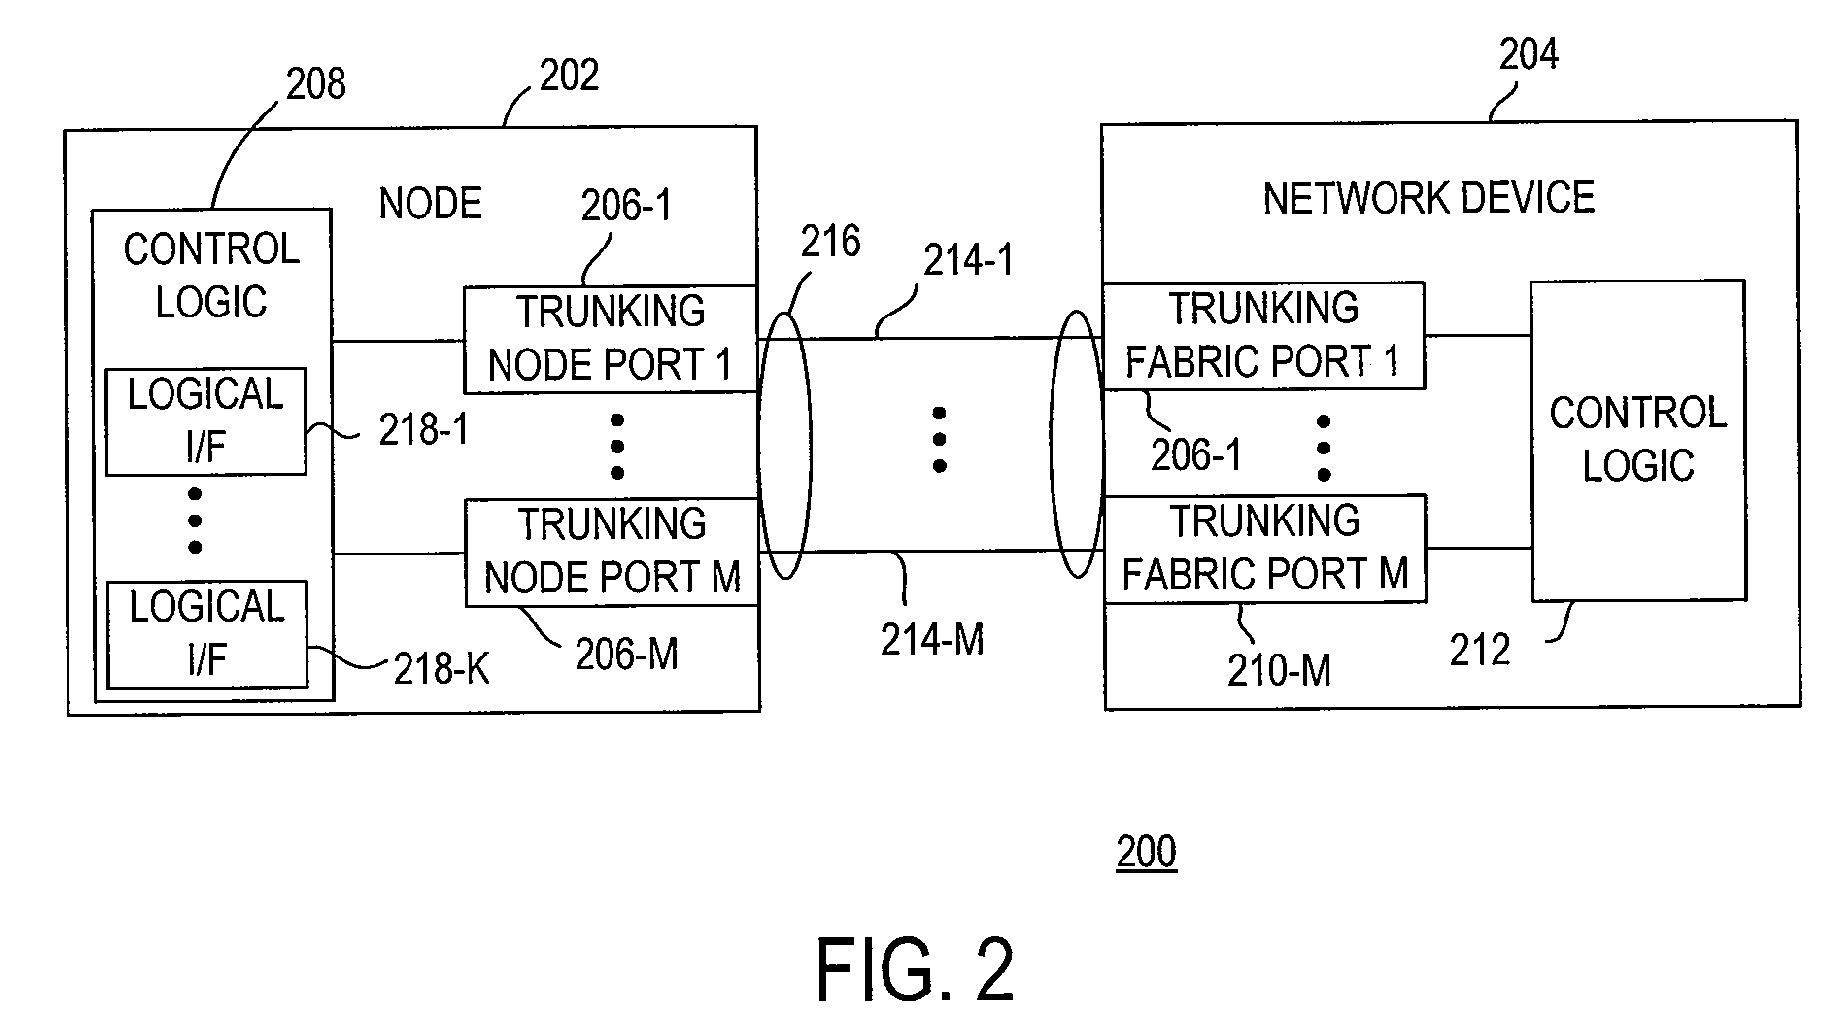 Trunking with port aggregation for fabric ports in a fibre channel fabric and attached devices